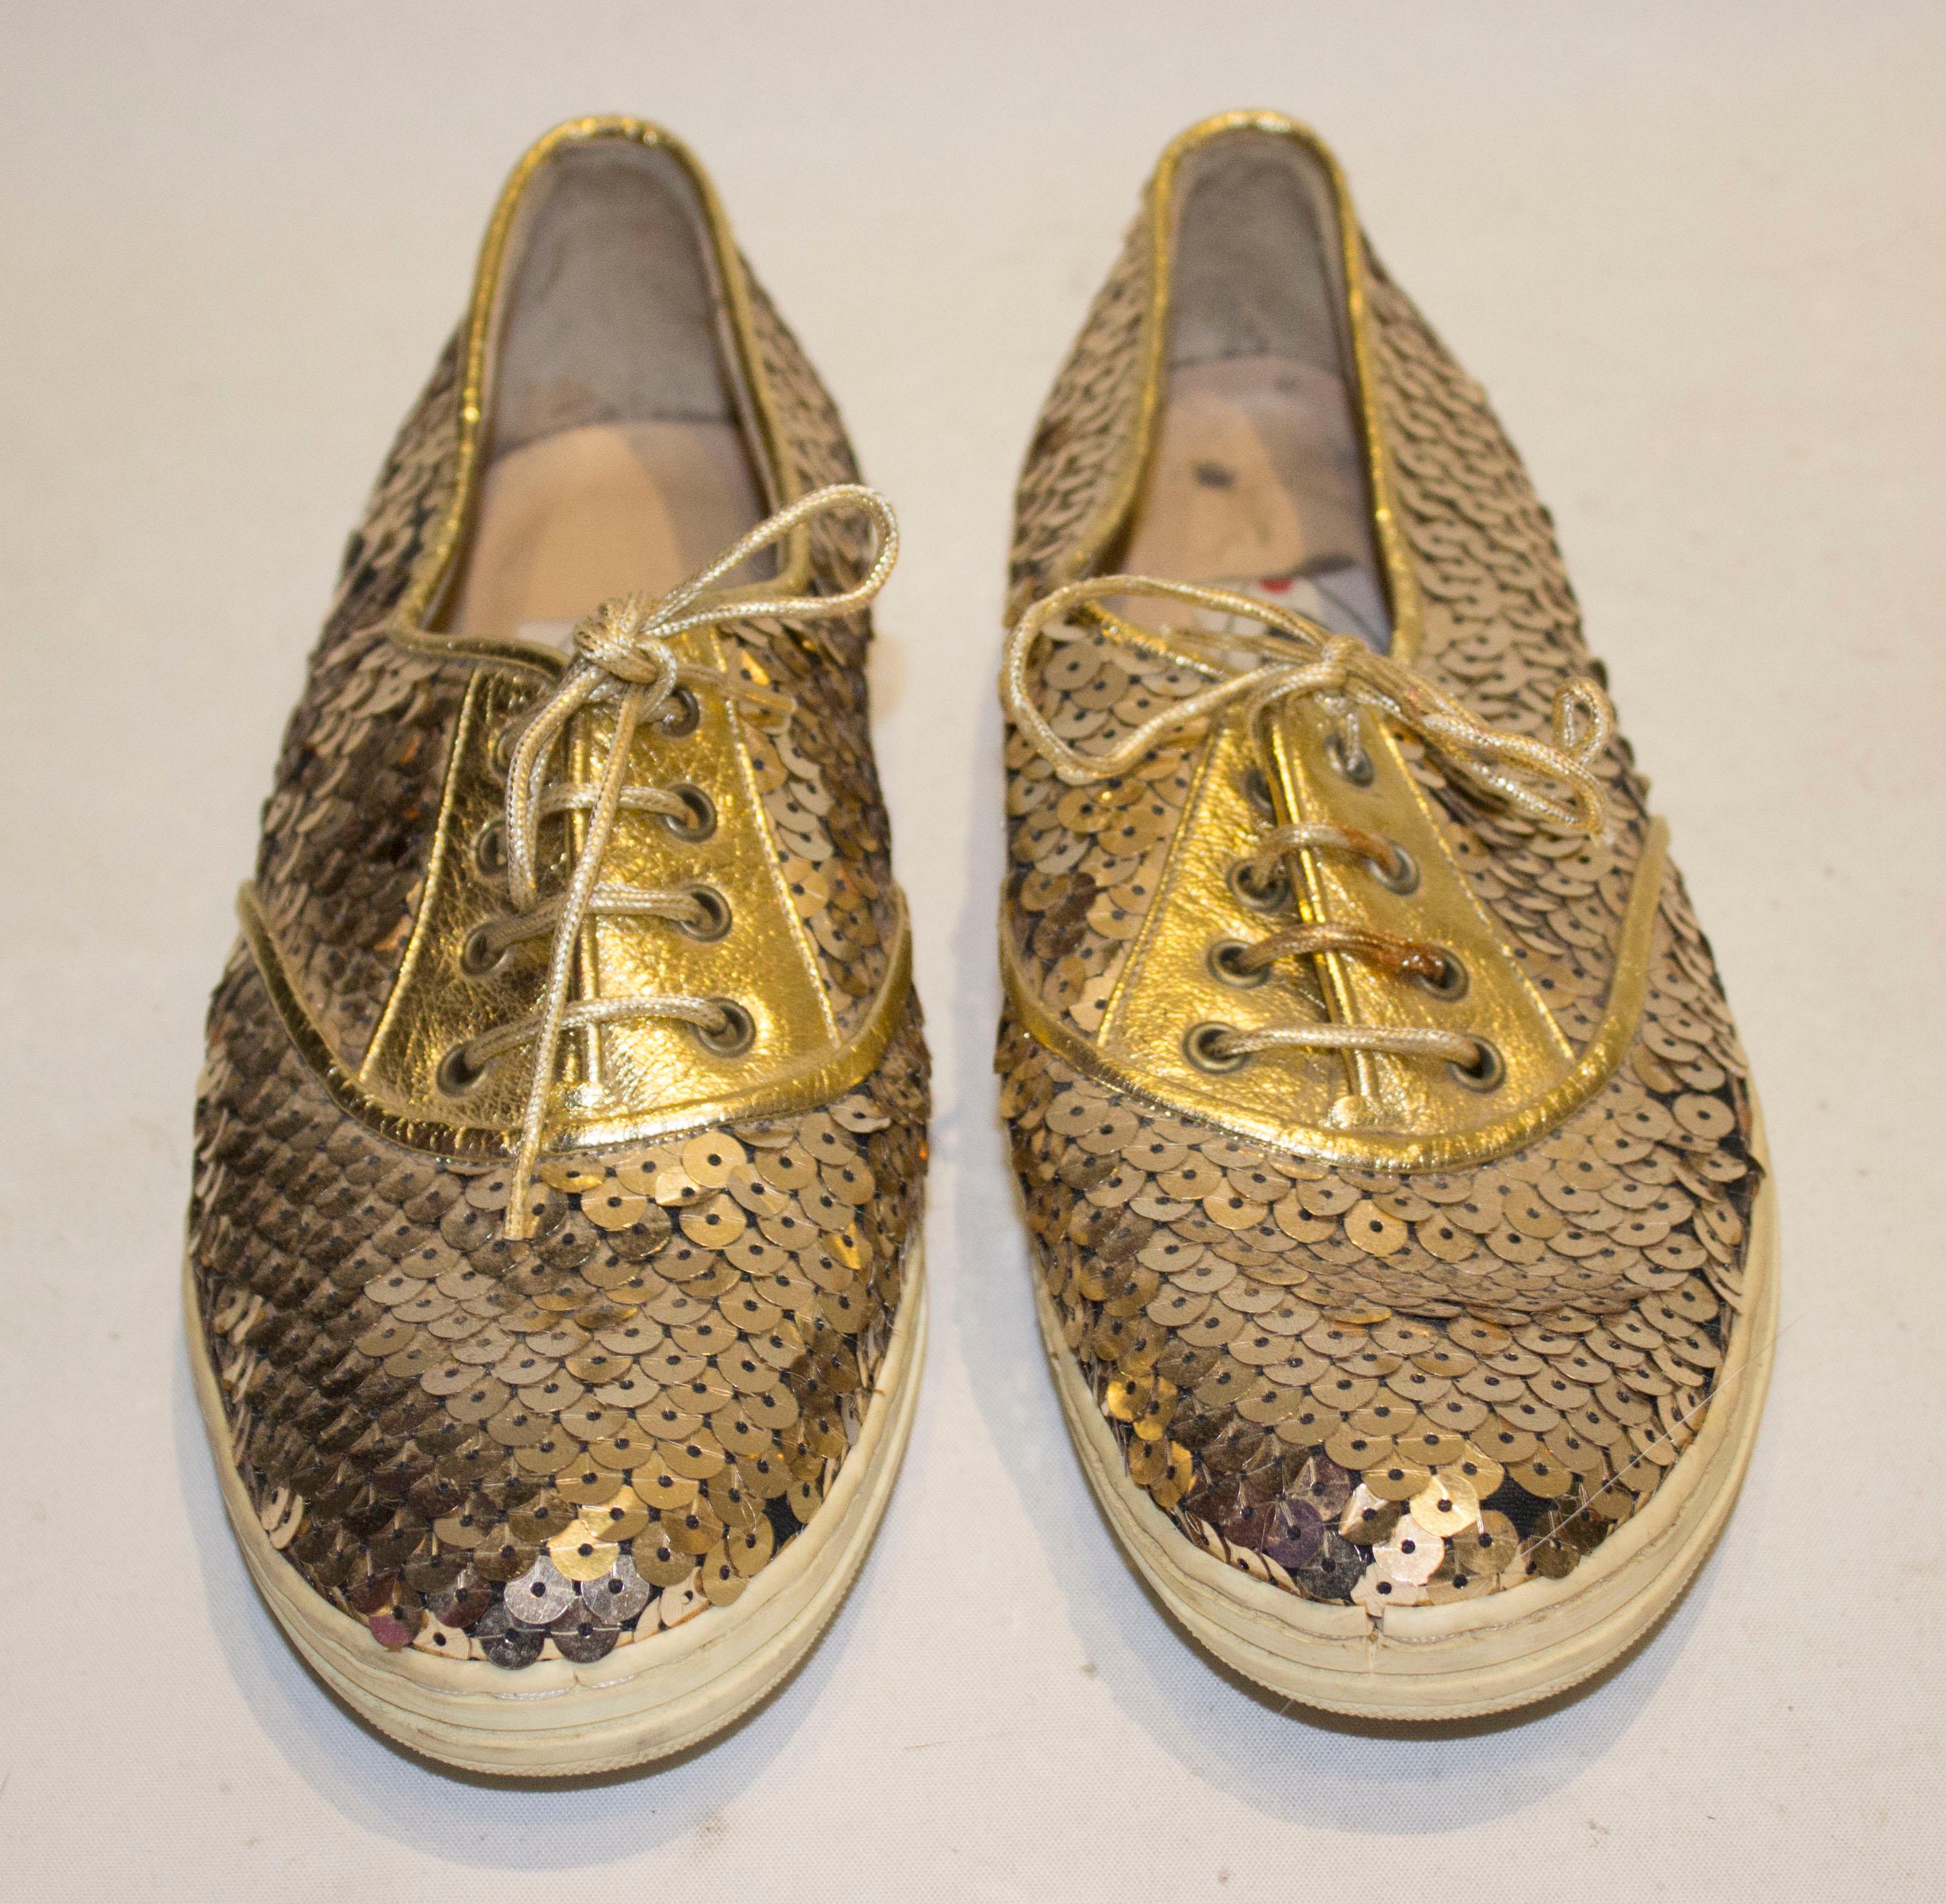 Perfect for running around in this Christmas /New Year,. These beautifuly made shoes will brighten any outfit. They have leather soles and lining and gold laces . Size 36 1 /2.